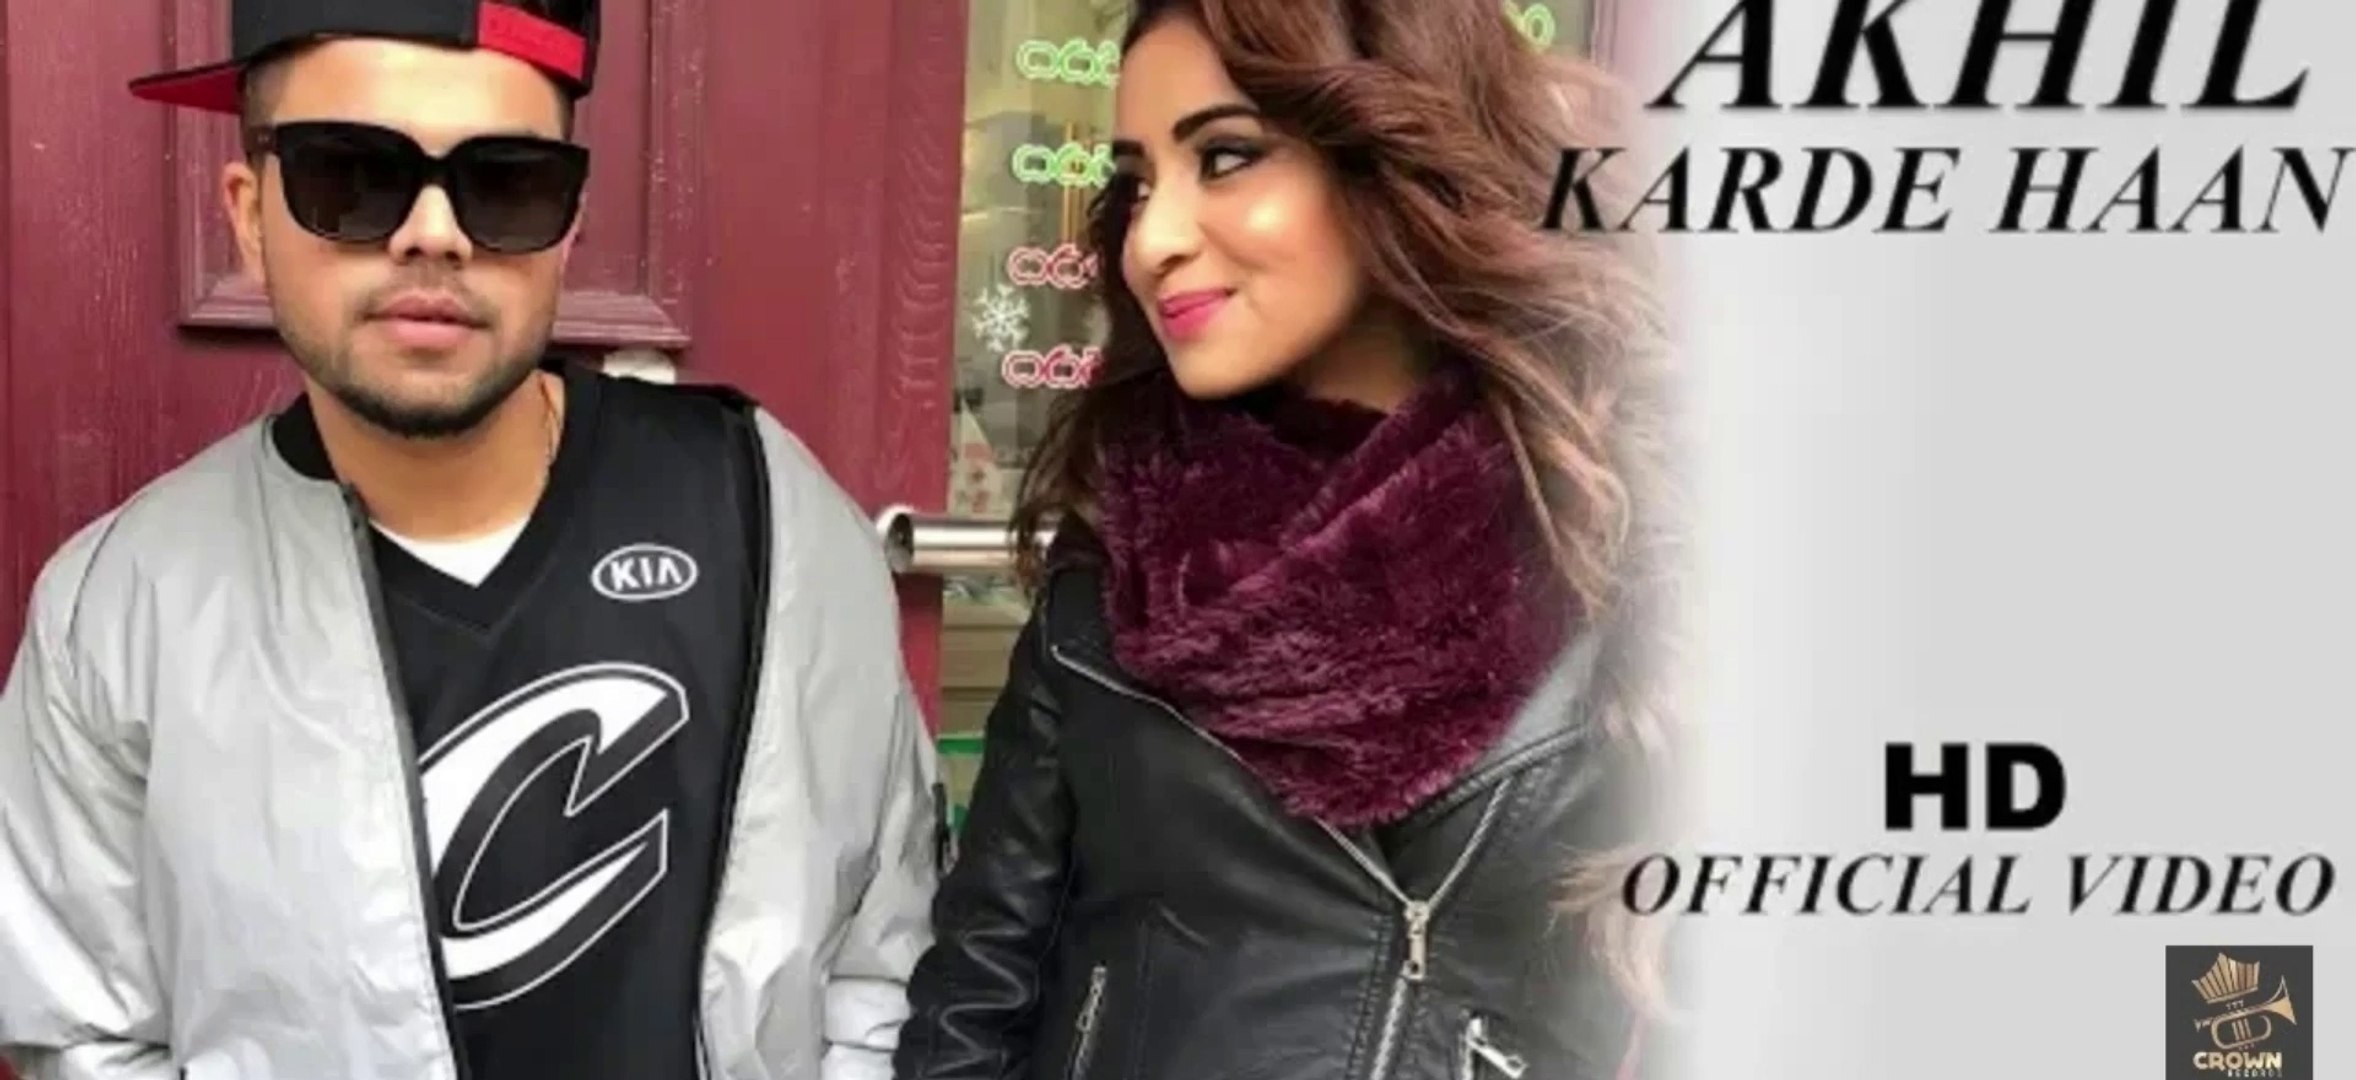 New Songs Karde Haan Hd Full Songs Akhil Manni Sandhu Official Video Collab Creation New Punjabi Songs Pk Hungama Masti Official Channel Video Dailymotion